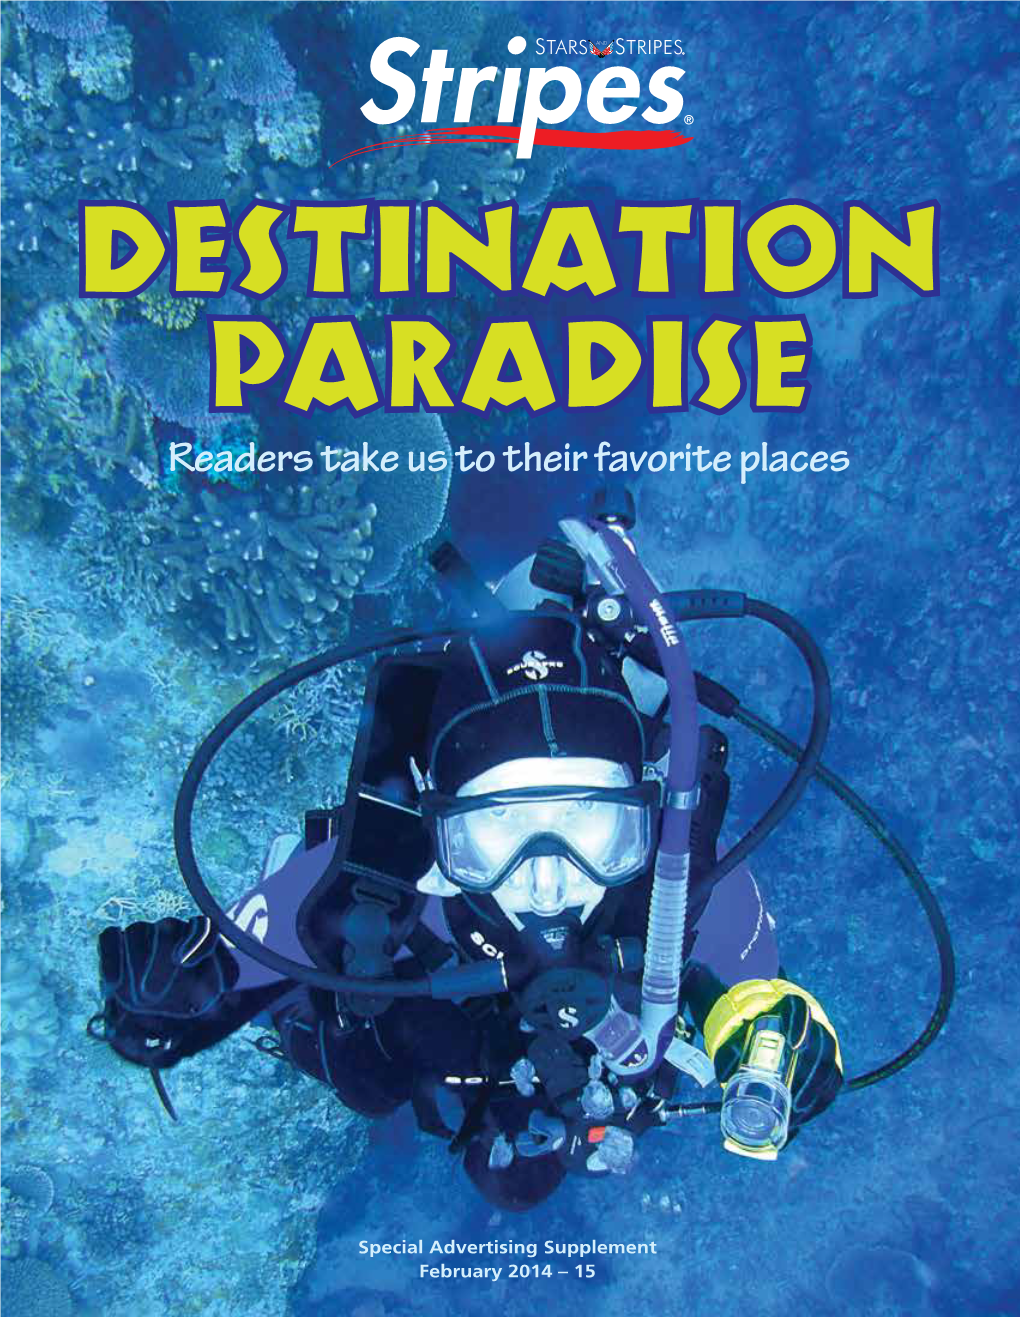 Destination Paradise 2014 Is an Exclusive Page 34 Stars and Stripes Adverting Supplement for Members of the U.S